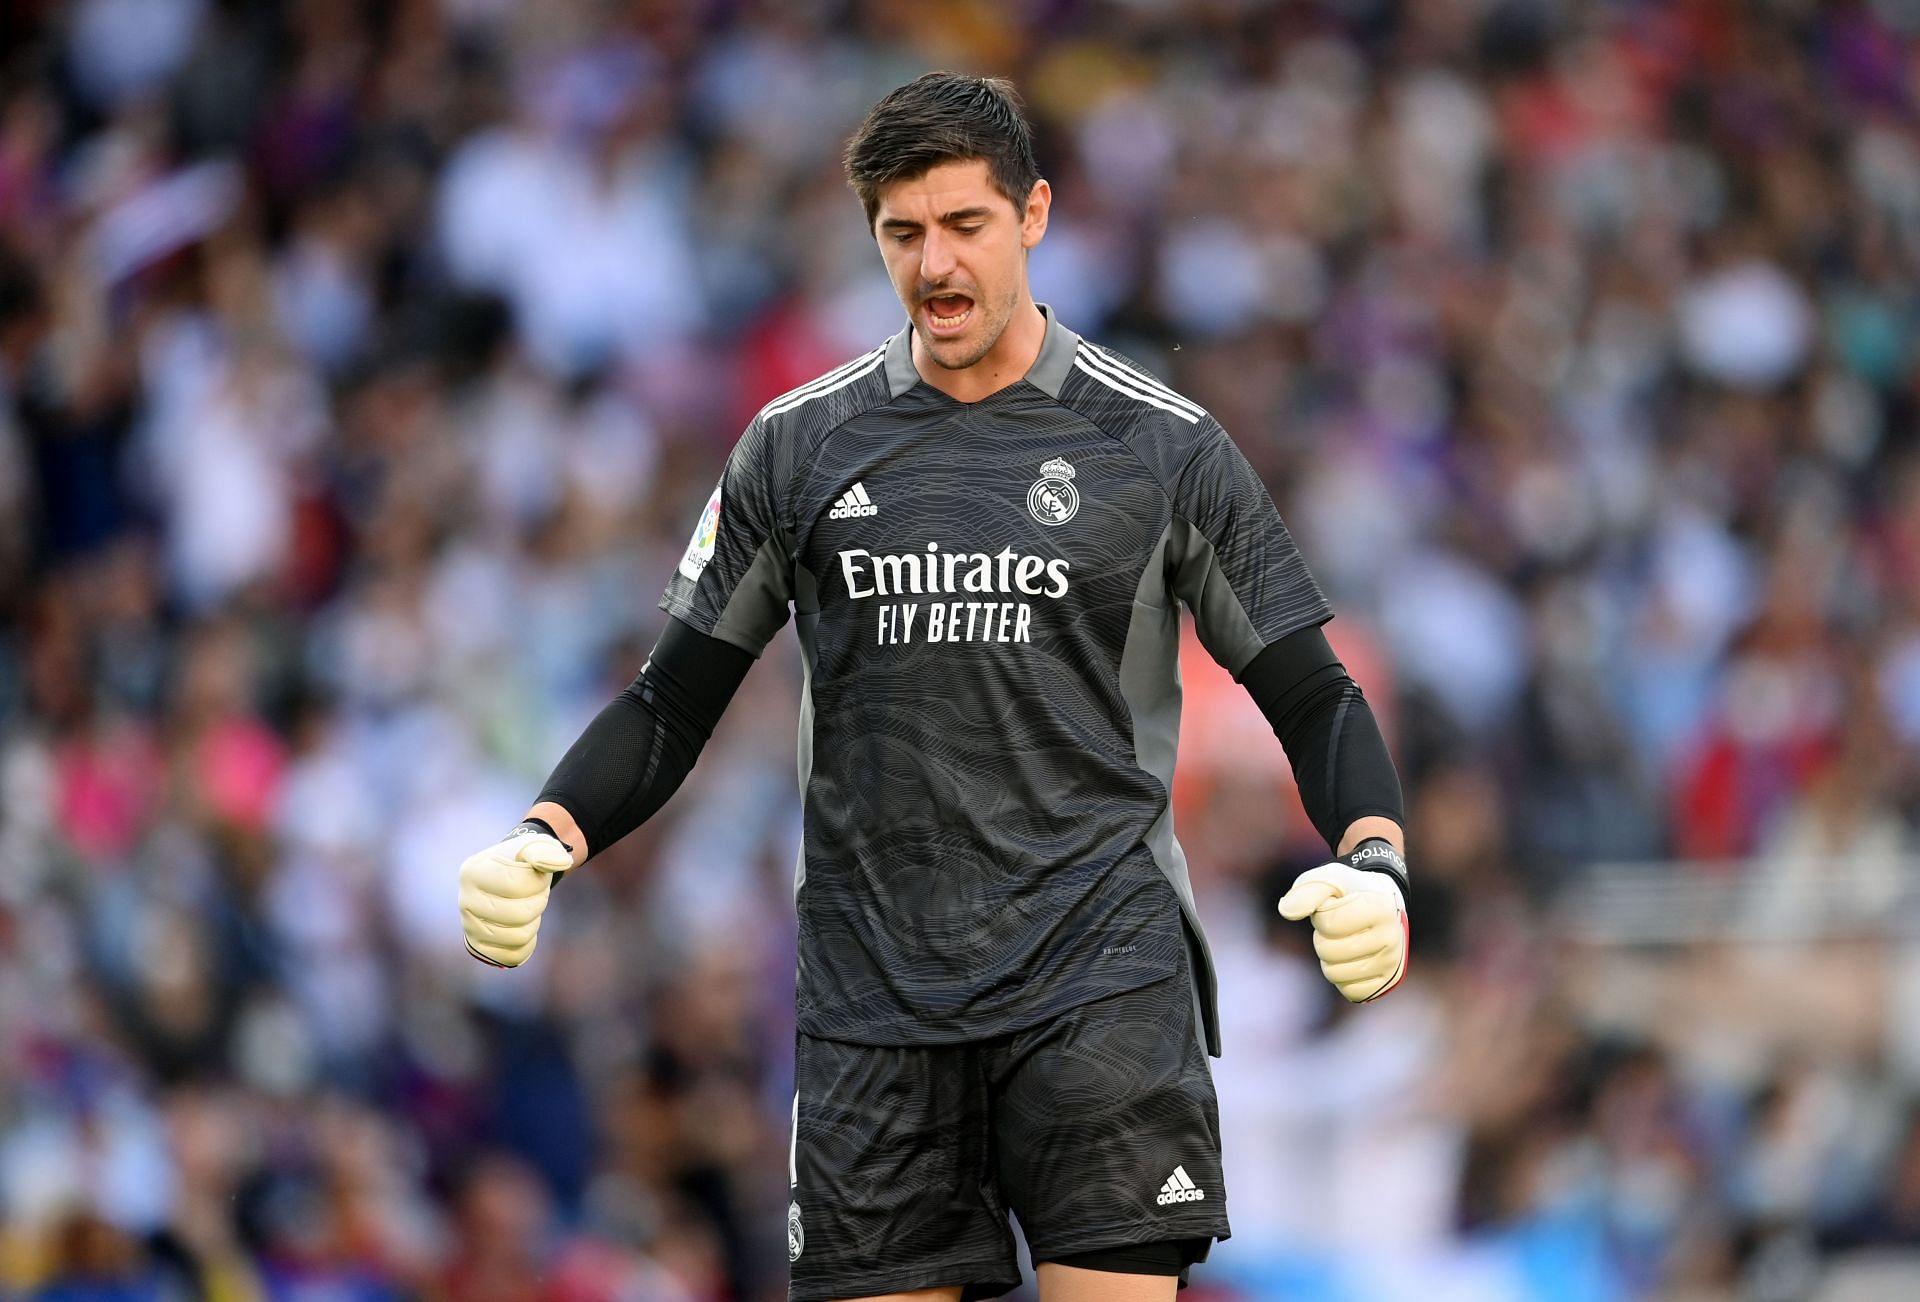 Thibaut Courtois is one of the best goalkeepers in the world